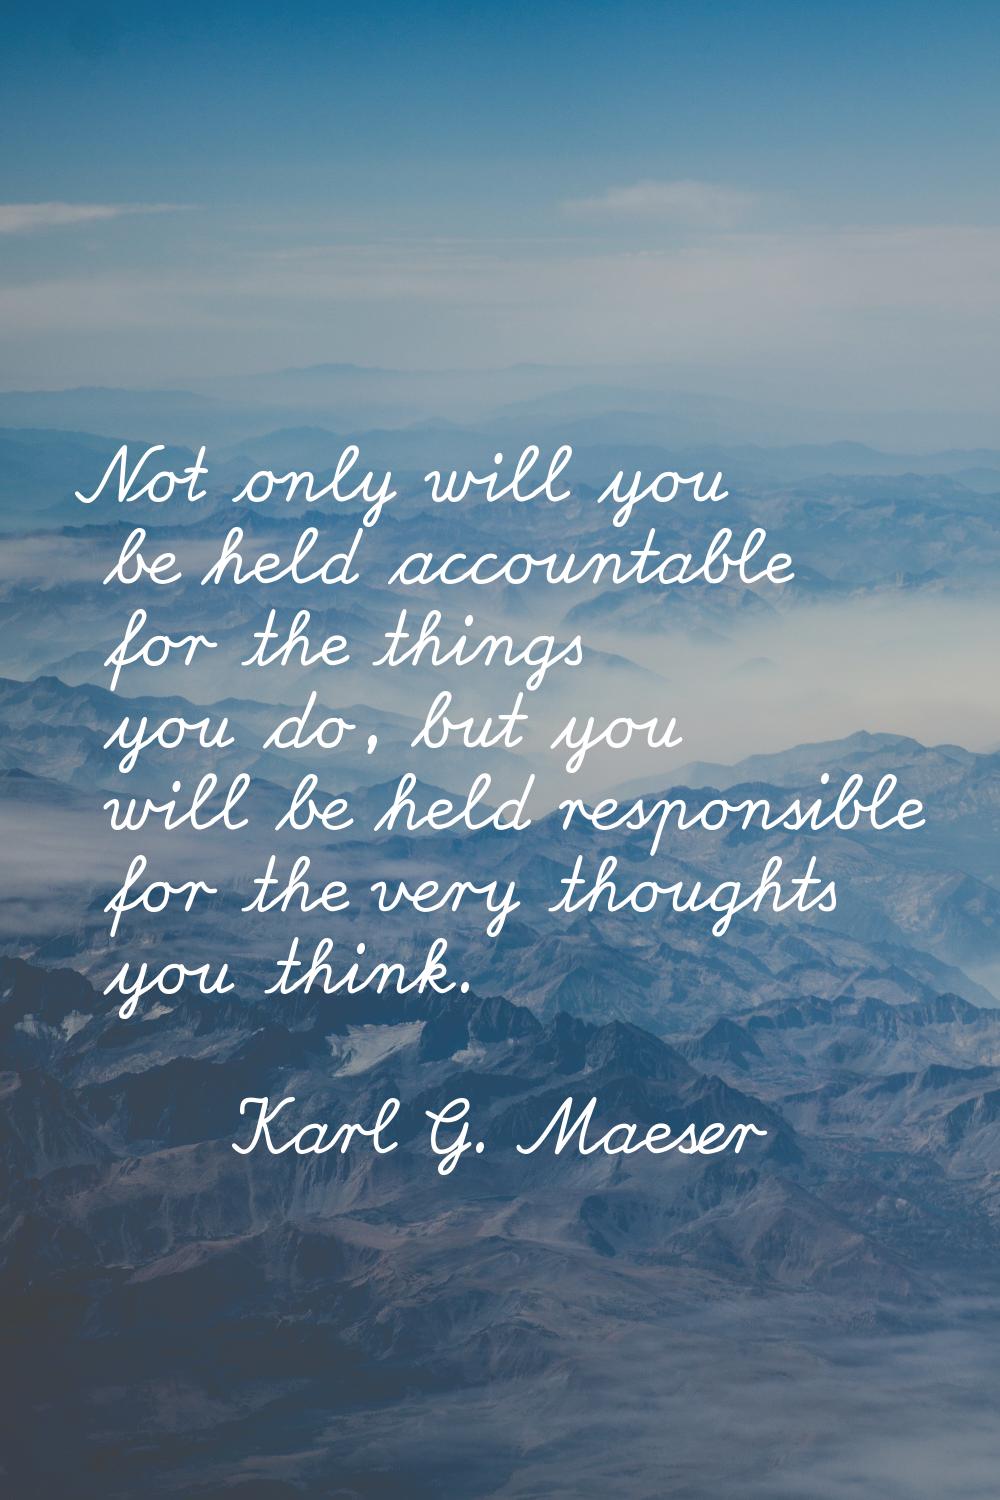 Not only will you be held accountable for the things you do, but you will be held responsible for t